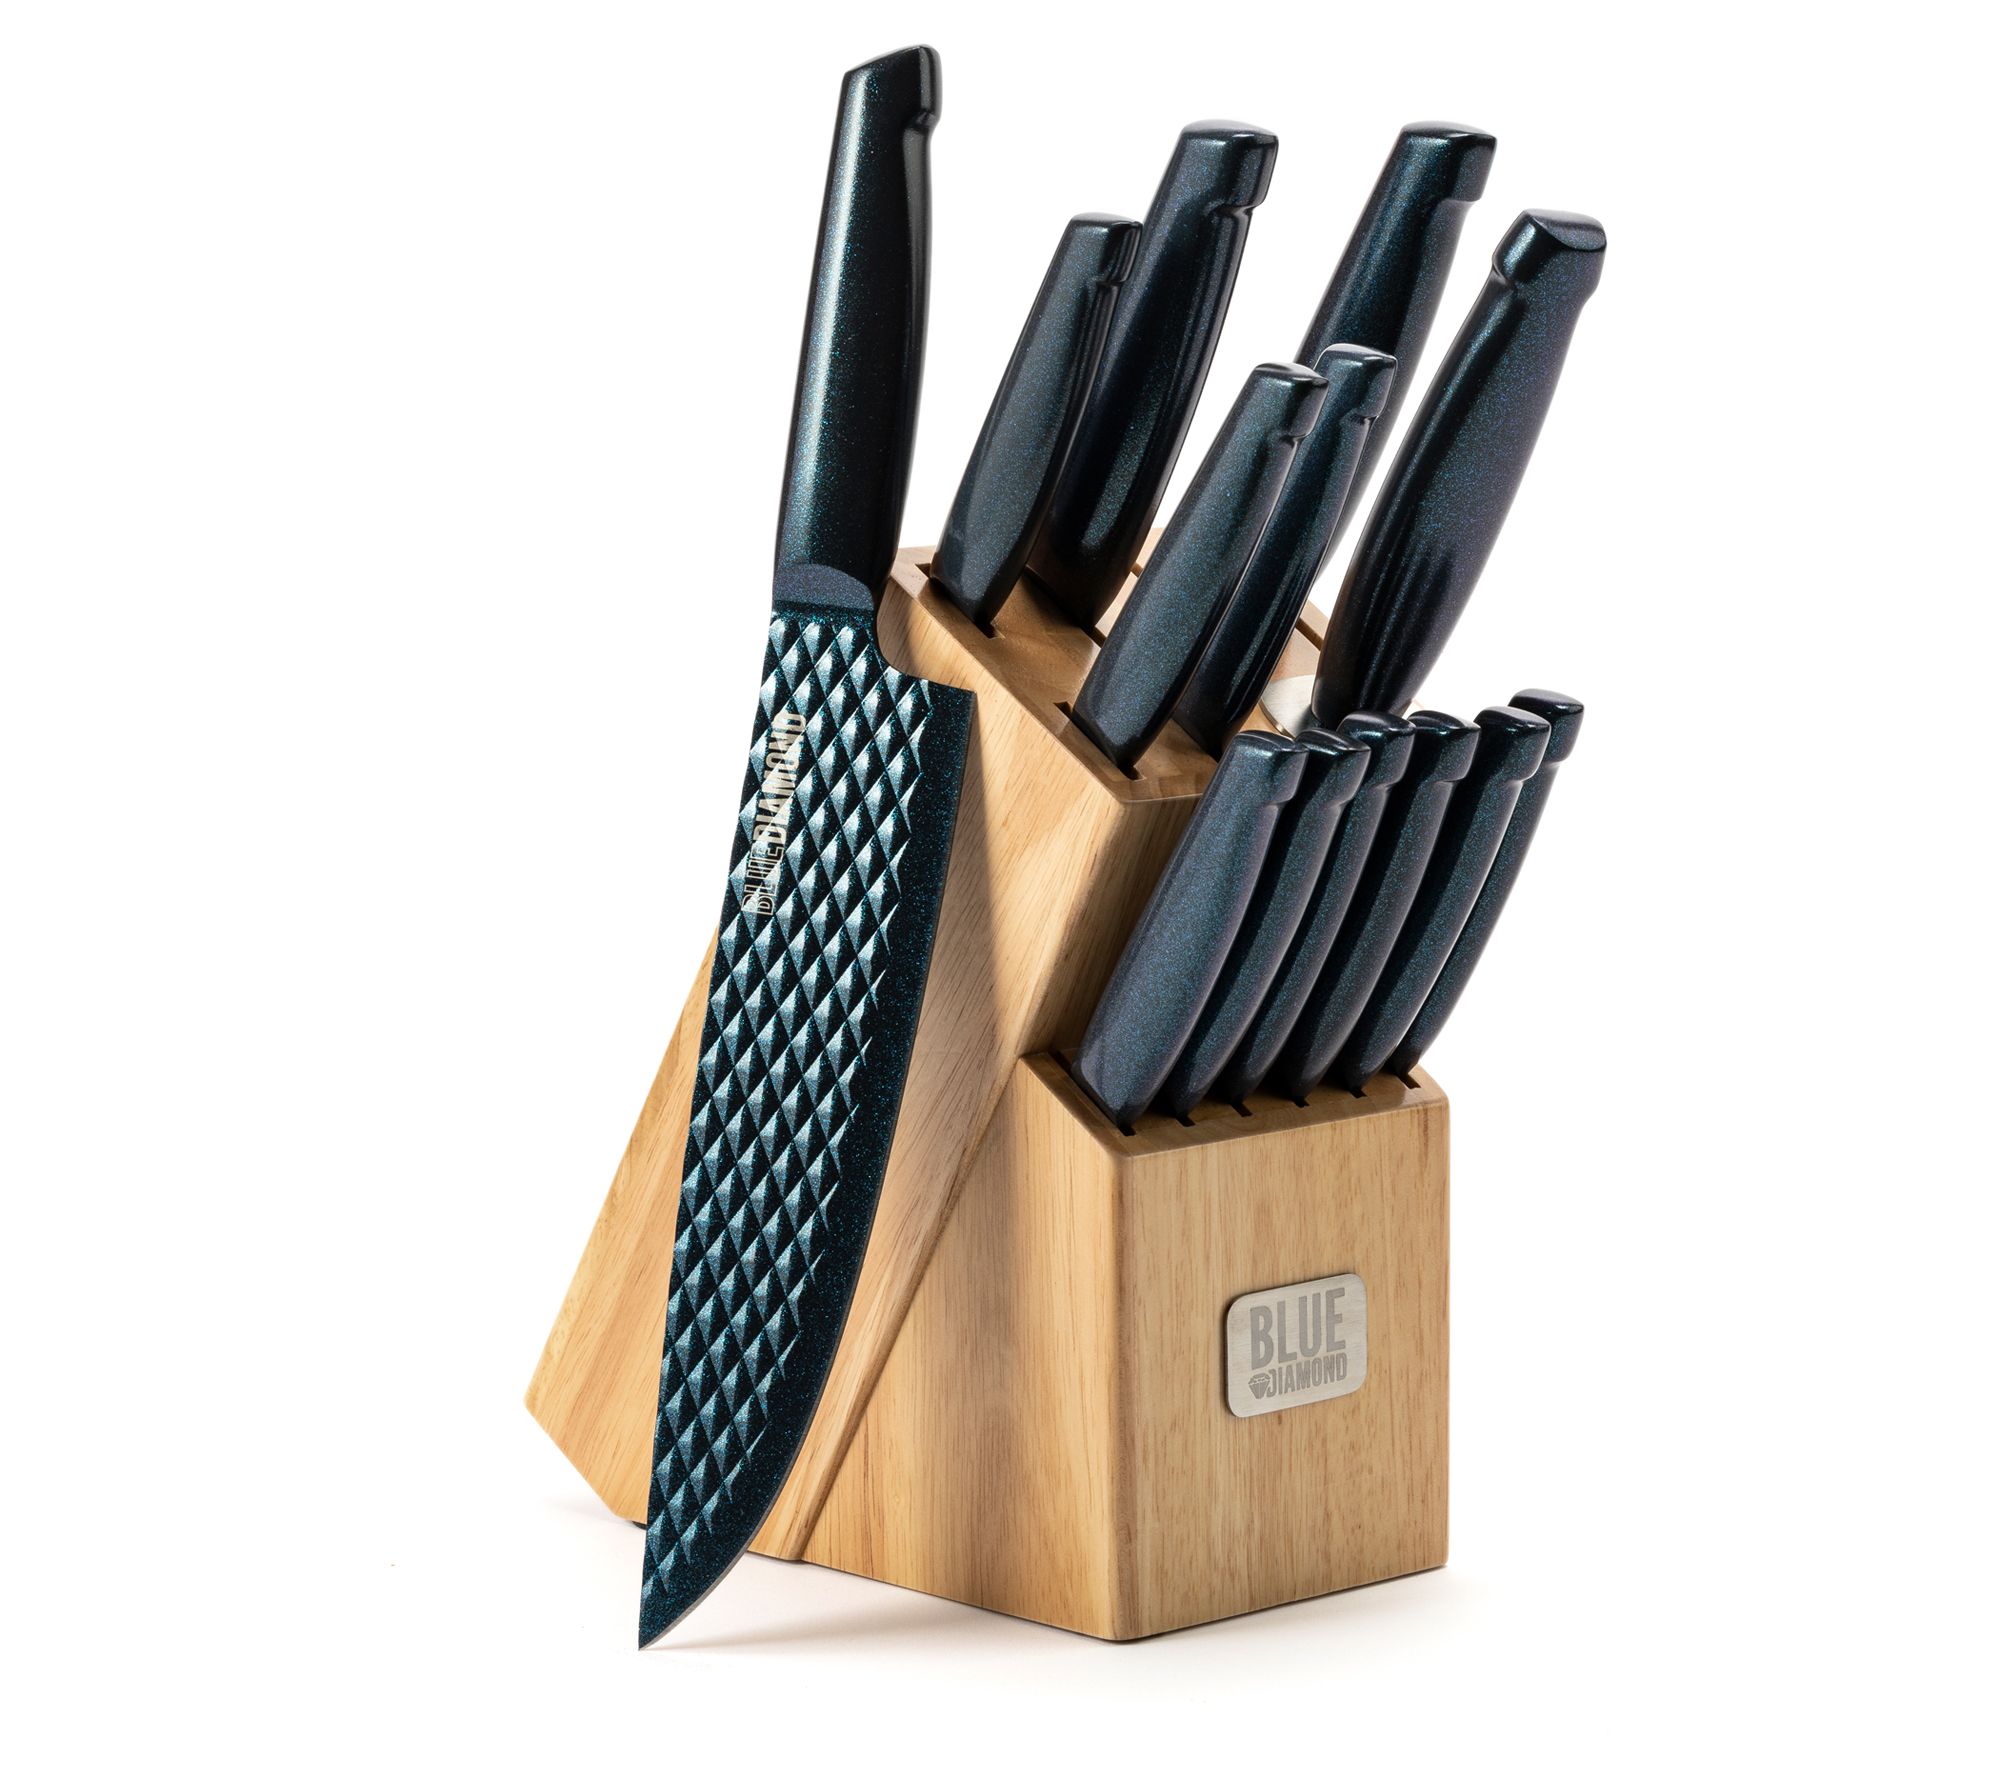 White and Gold Knife Set with Block Self Sharpening - 14 PC